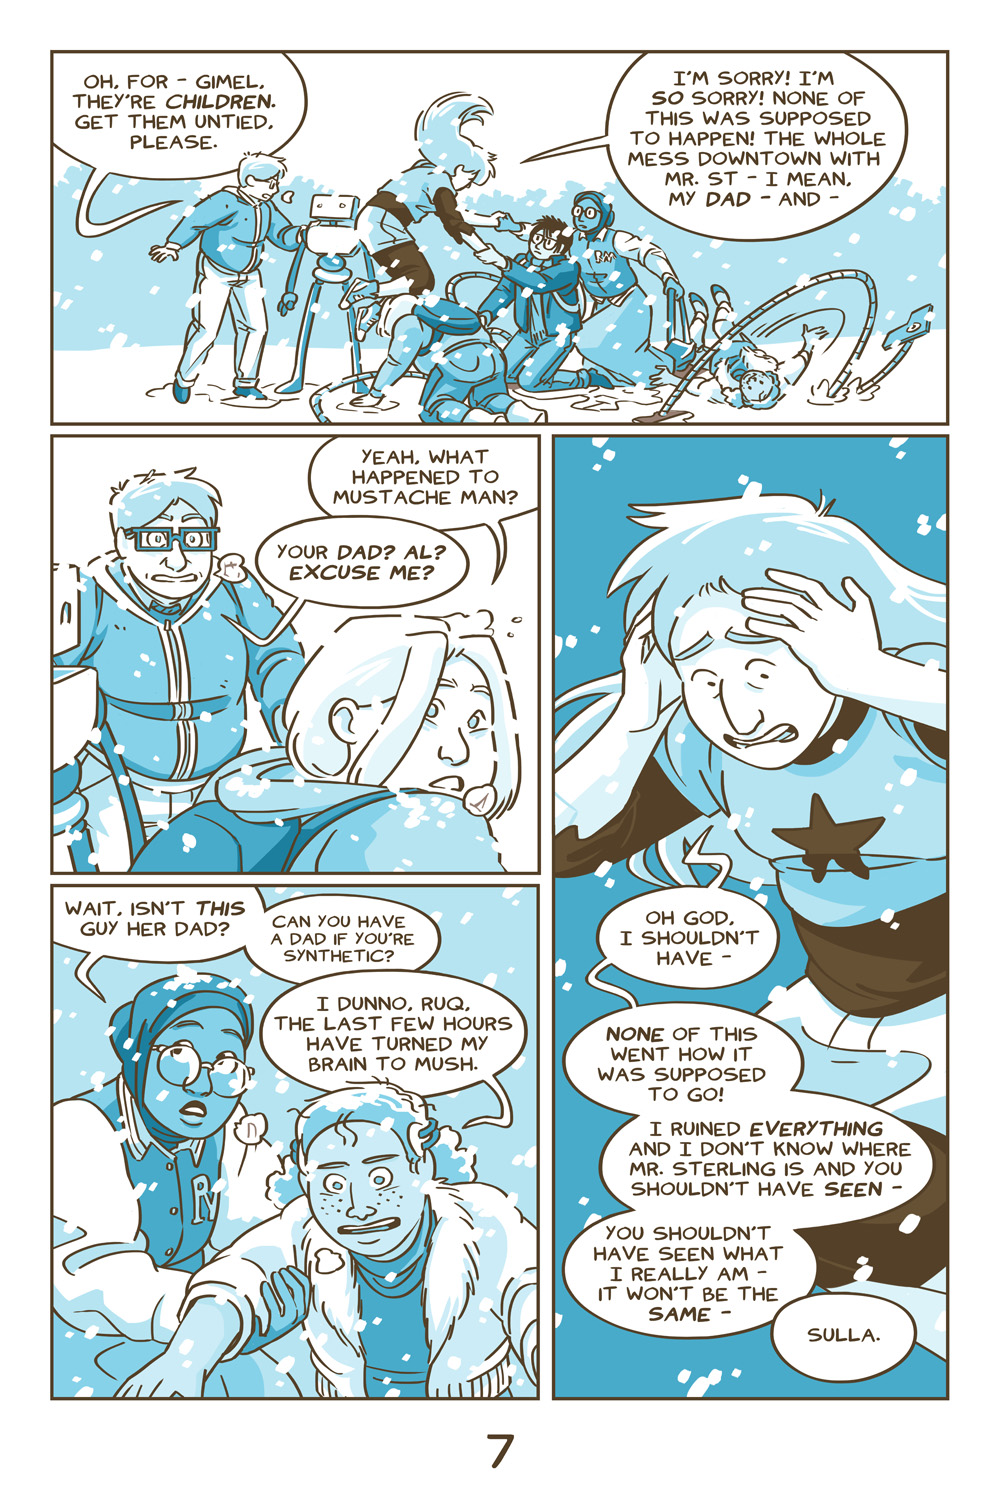 Chapter 7, Page 7